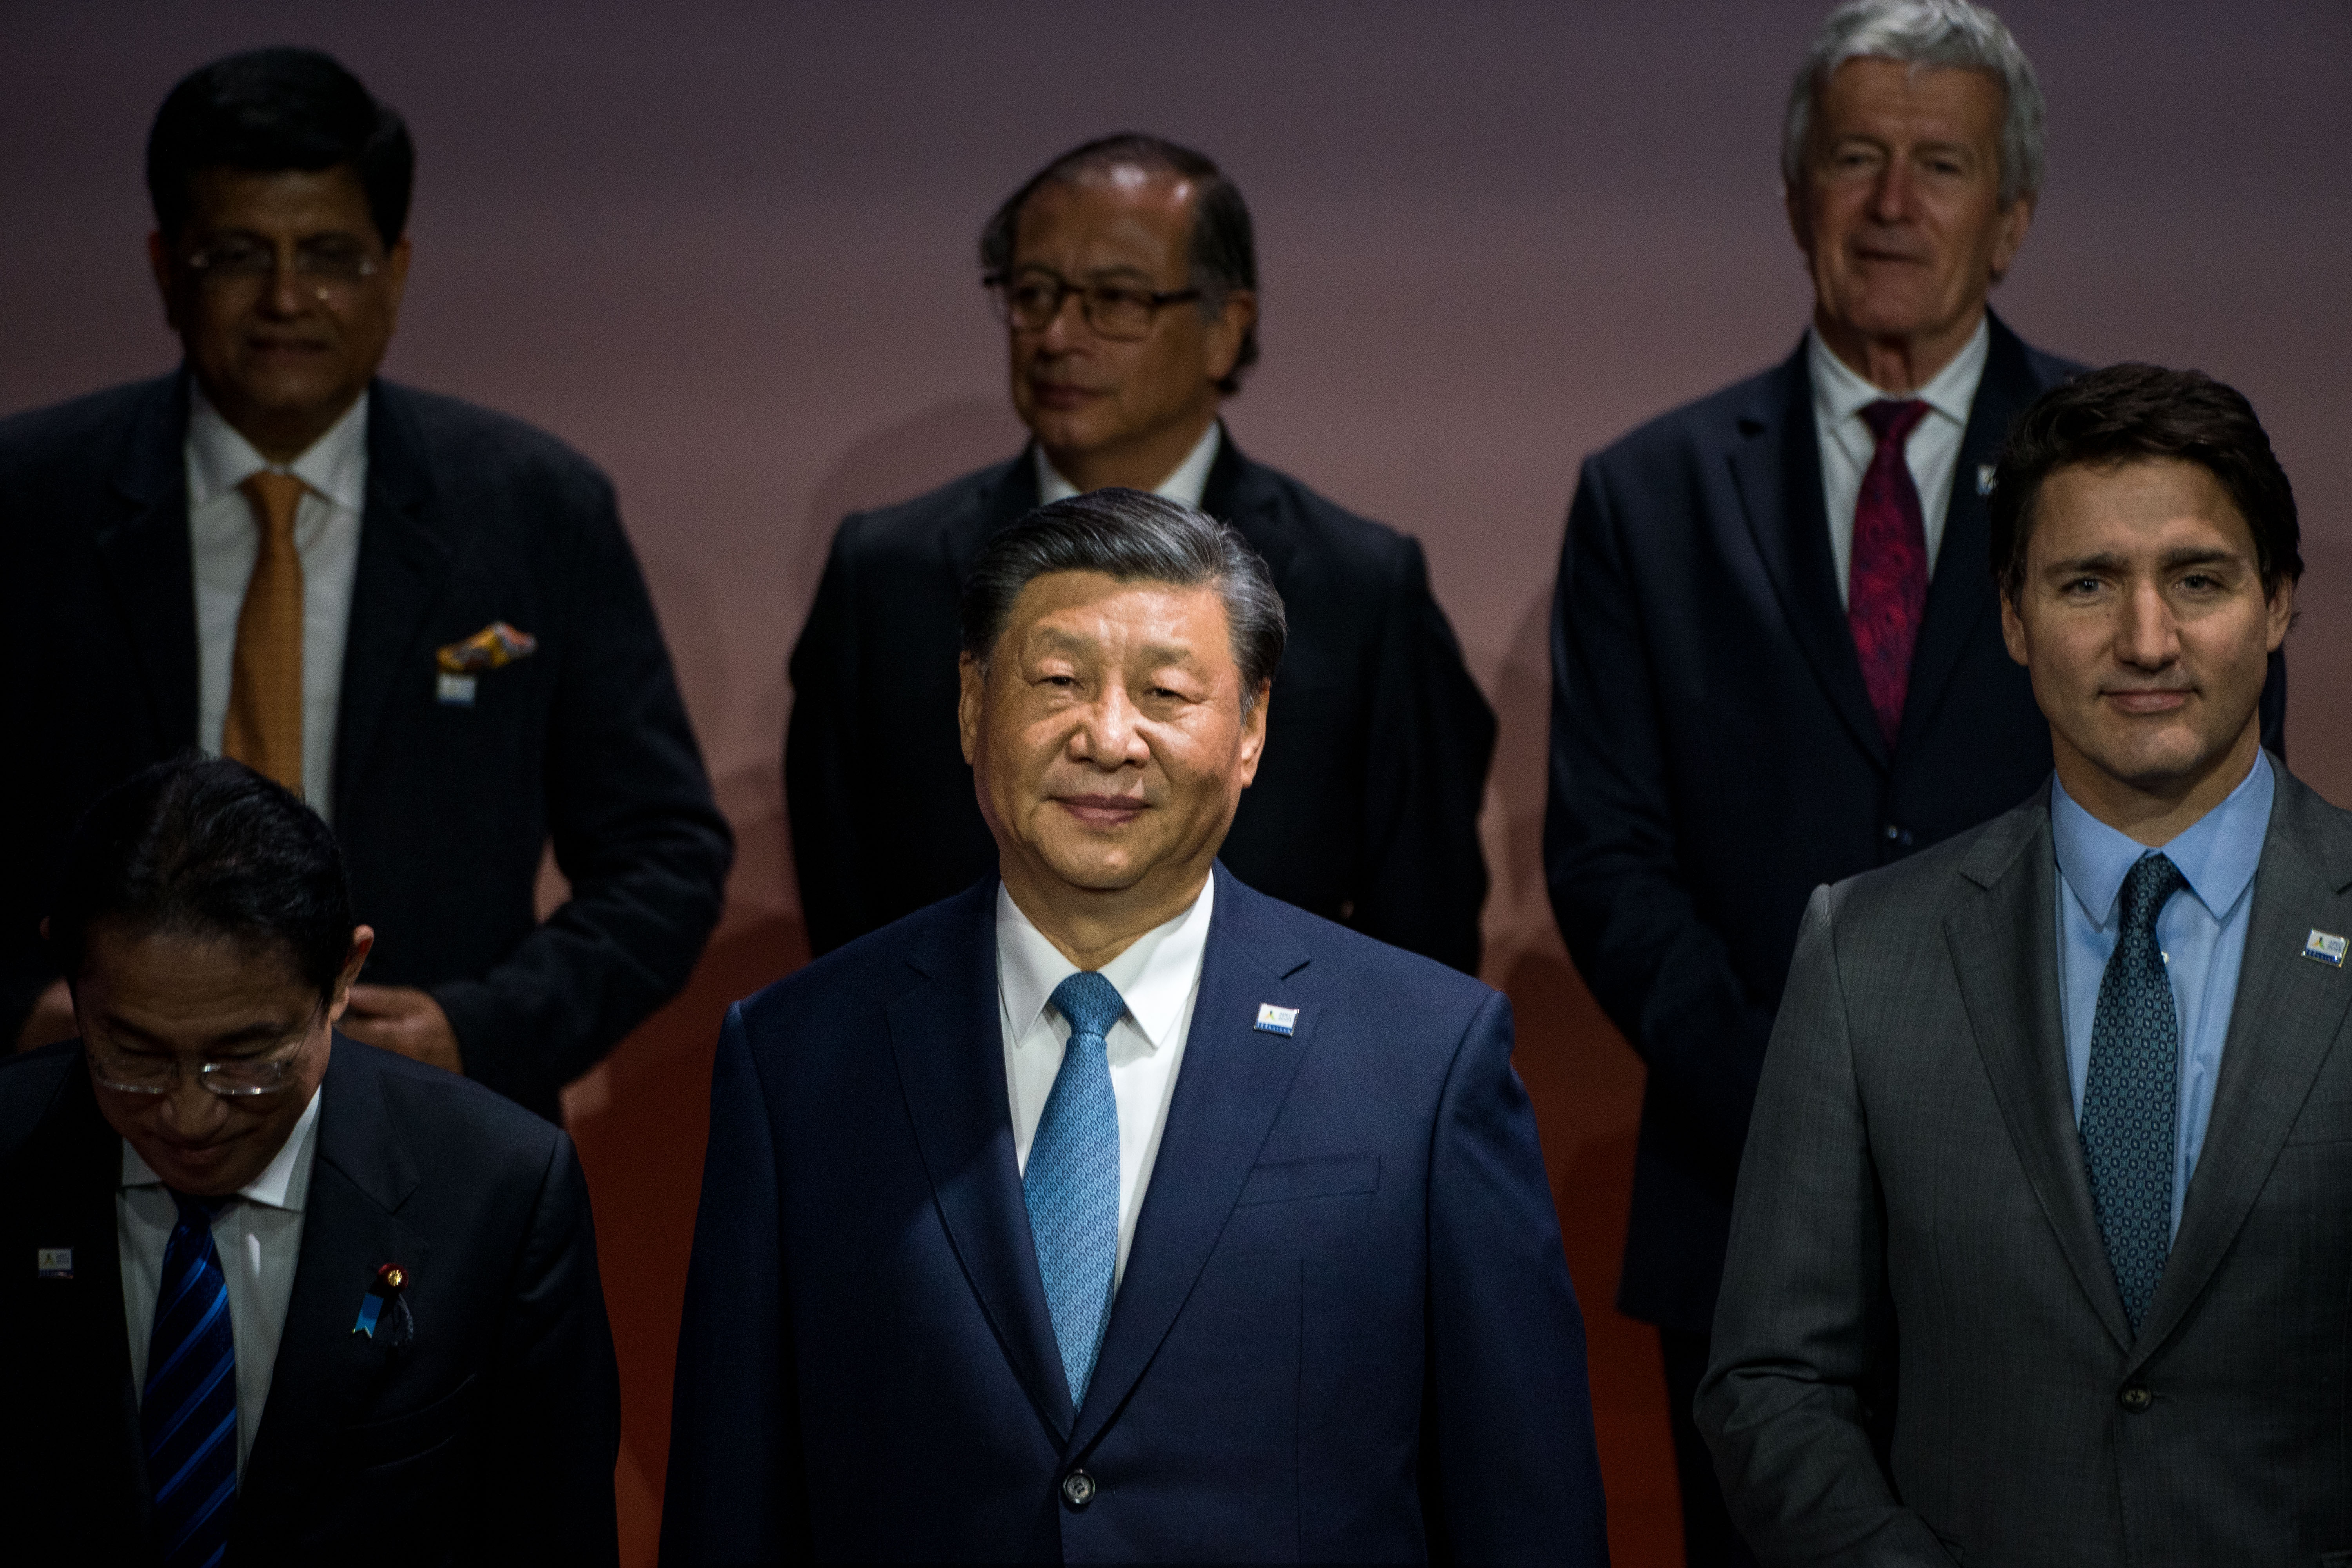 Trudeau, Xi appear to avoid each other at APEC Summit